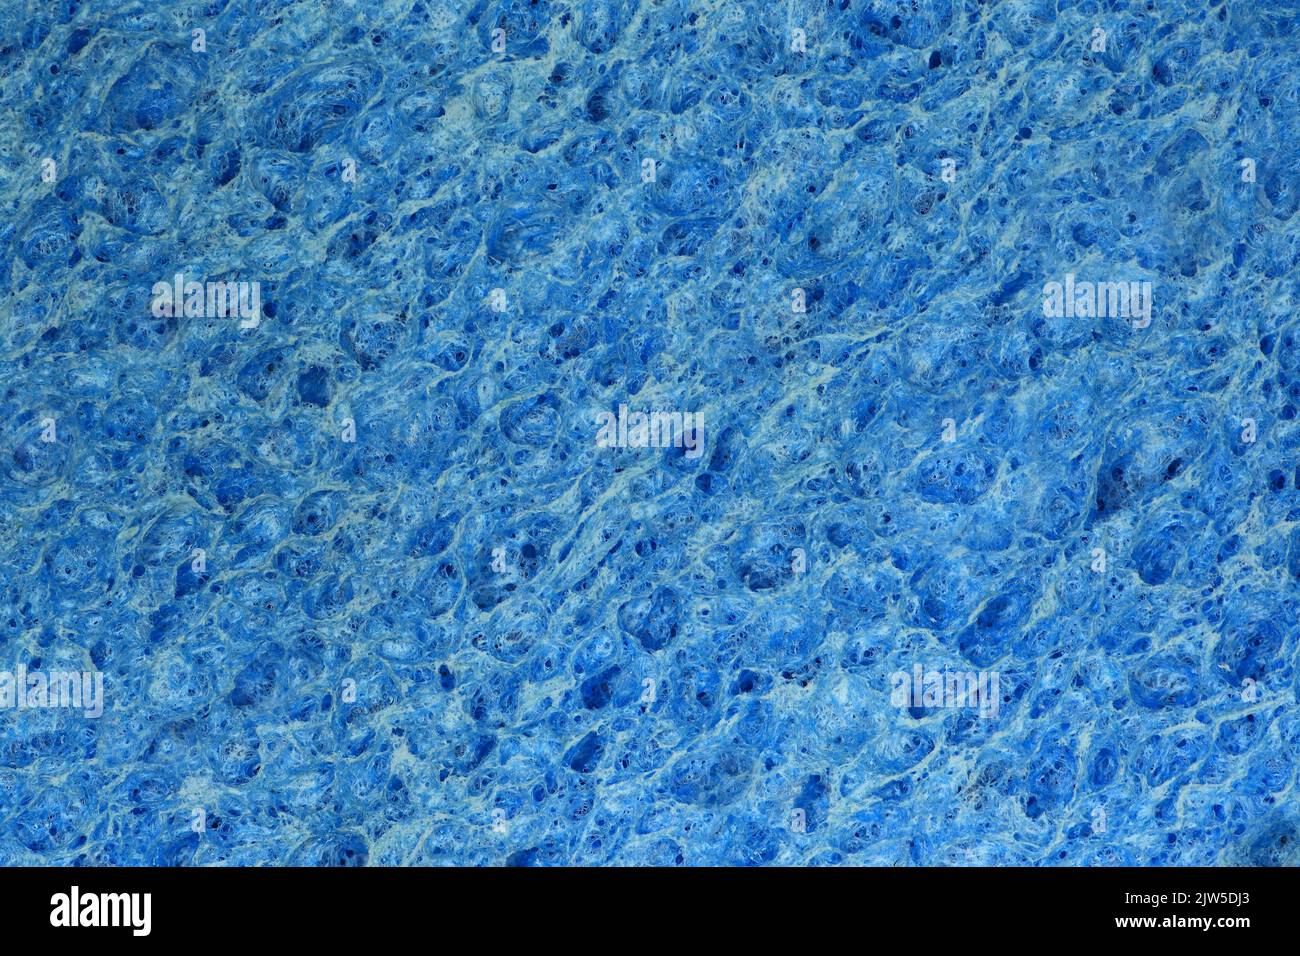 An extreme close-up of a dry, blue, kitchen dishwashing sponge postioned flat and straight on Stock Photo